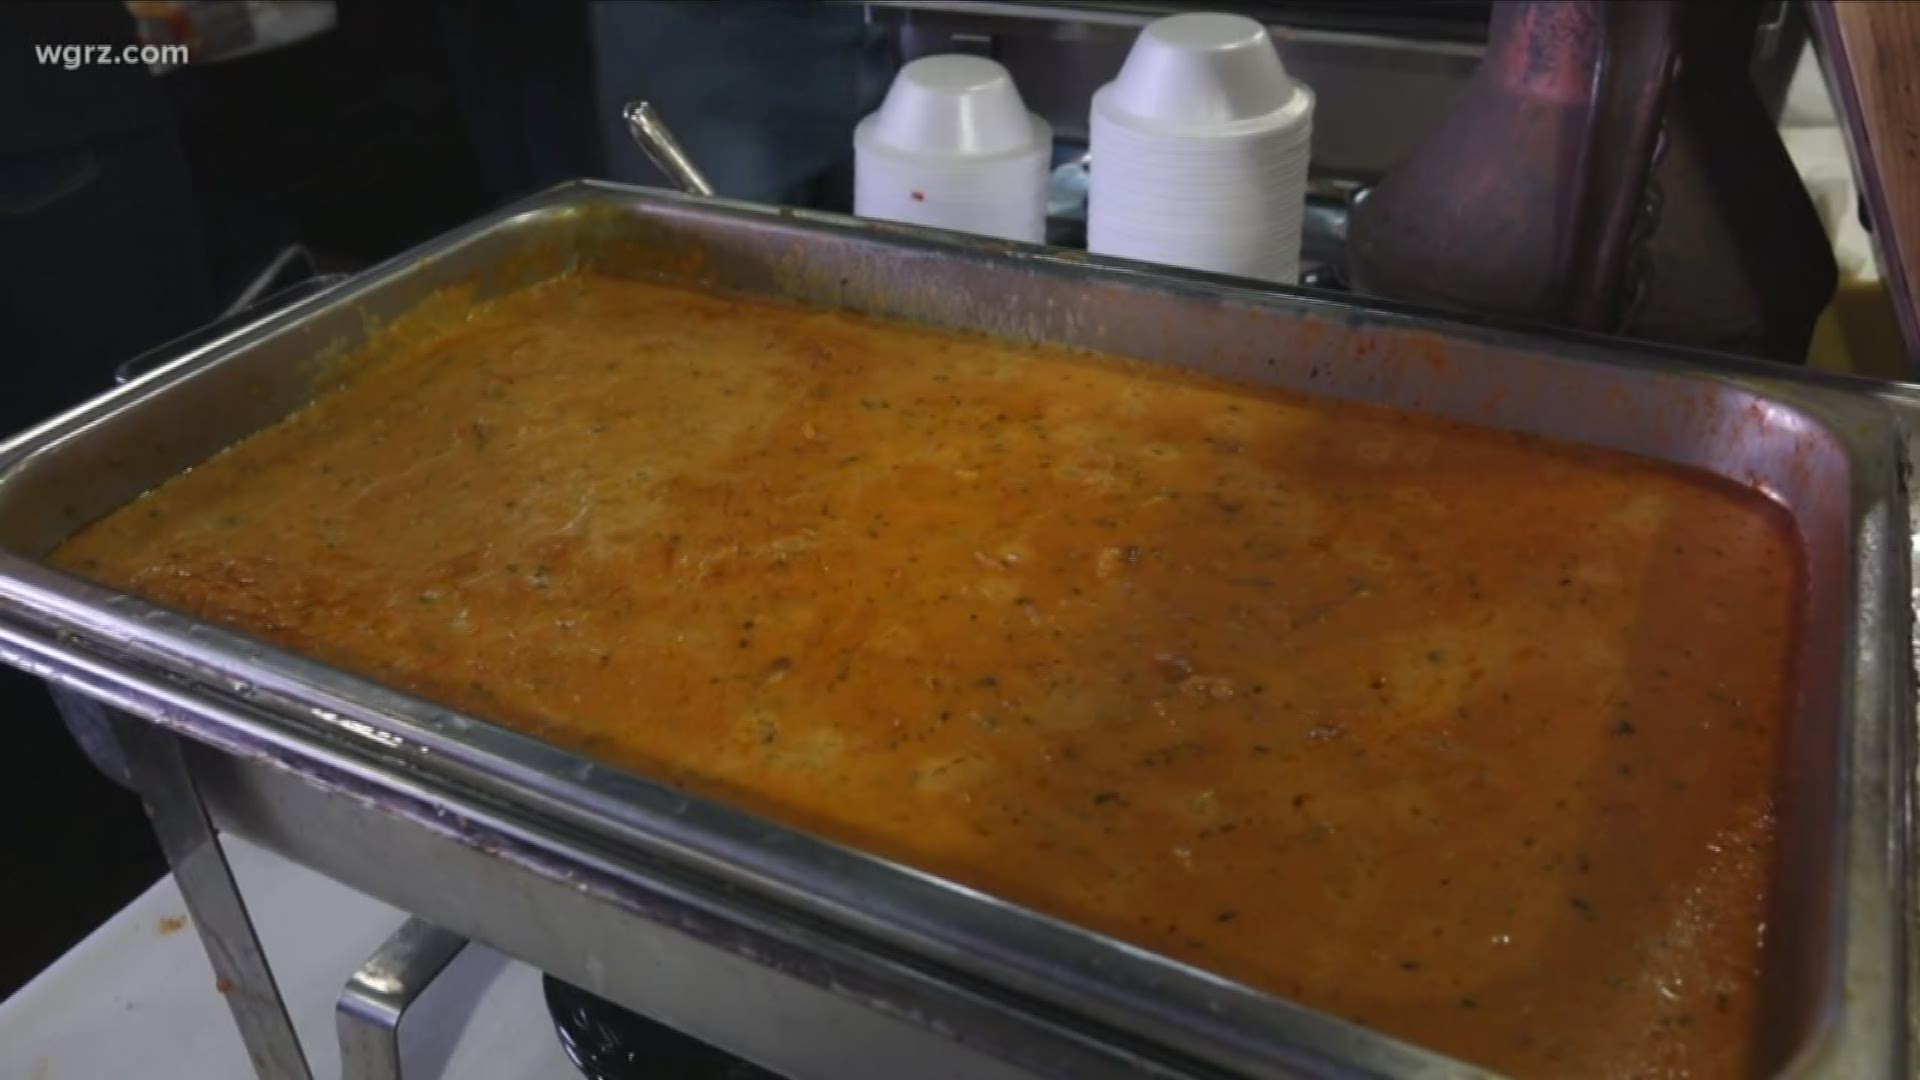 More than two dozen restaurants were serving up around 75 different soups. Proceeds from this year's event will go towards the group "Friends of the Night People."